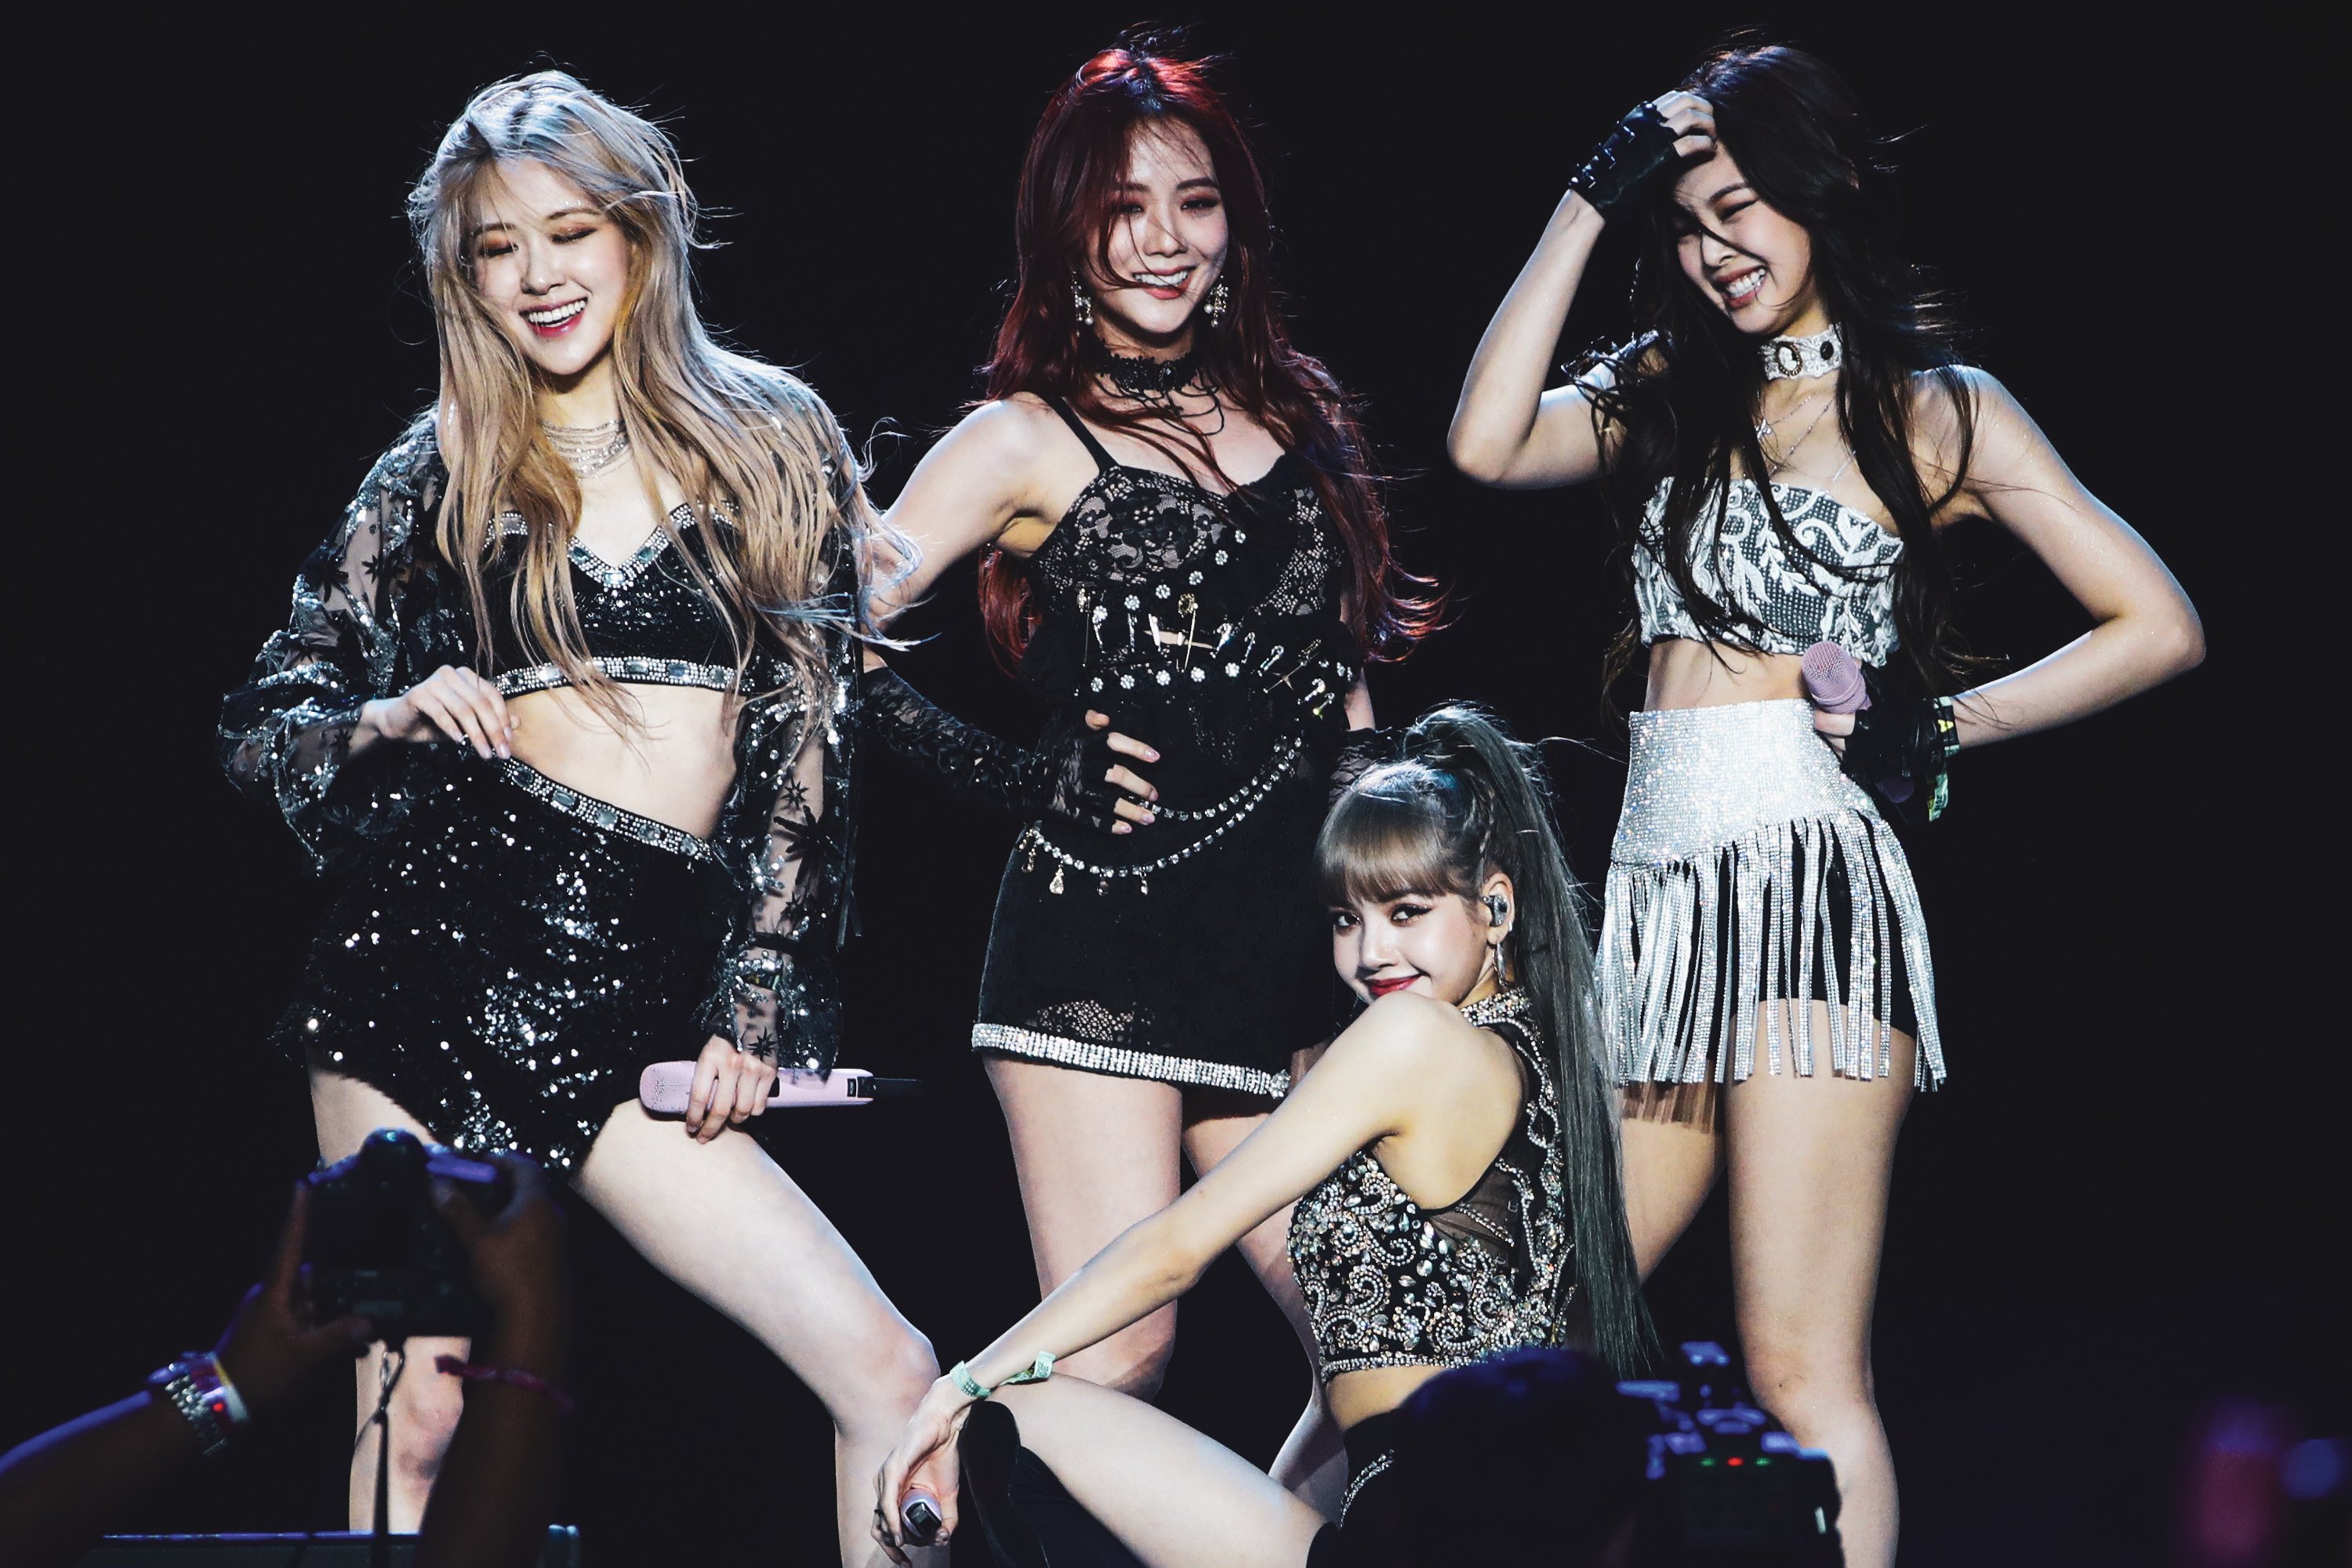 BLACKPINK performs during the 2019 Coachella Valley Music And Arts Festival